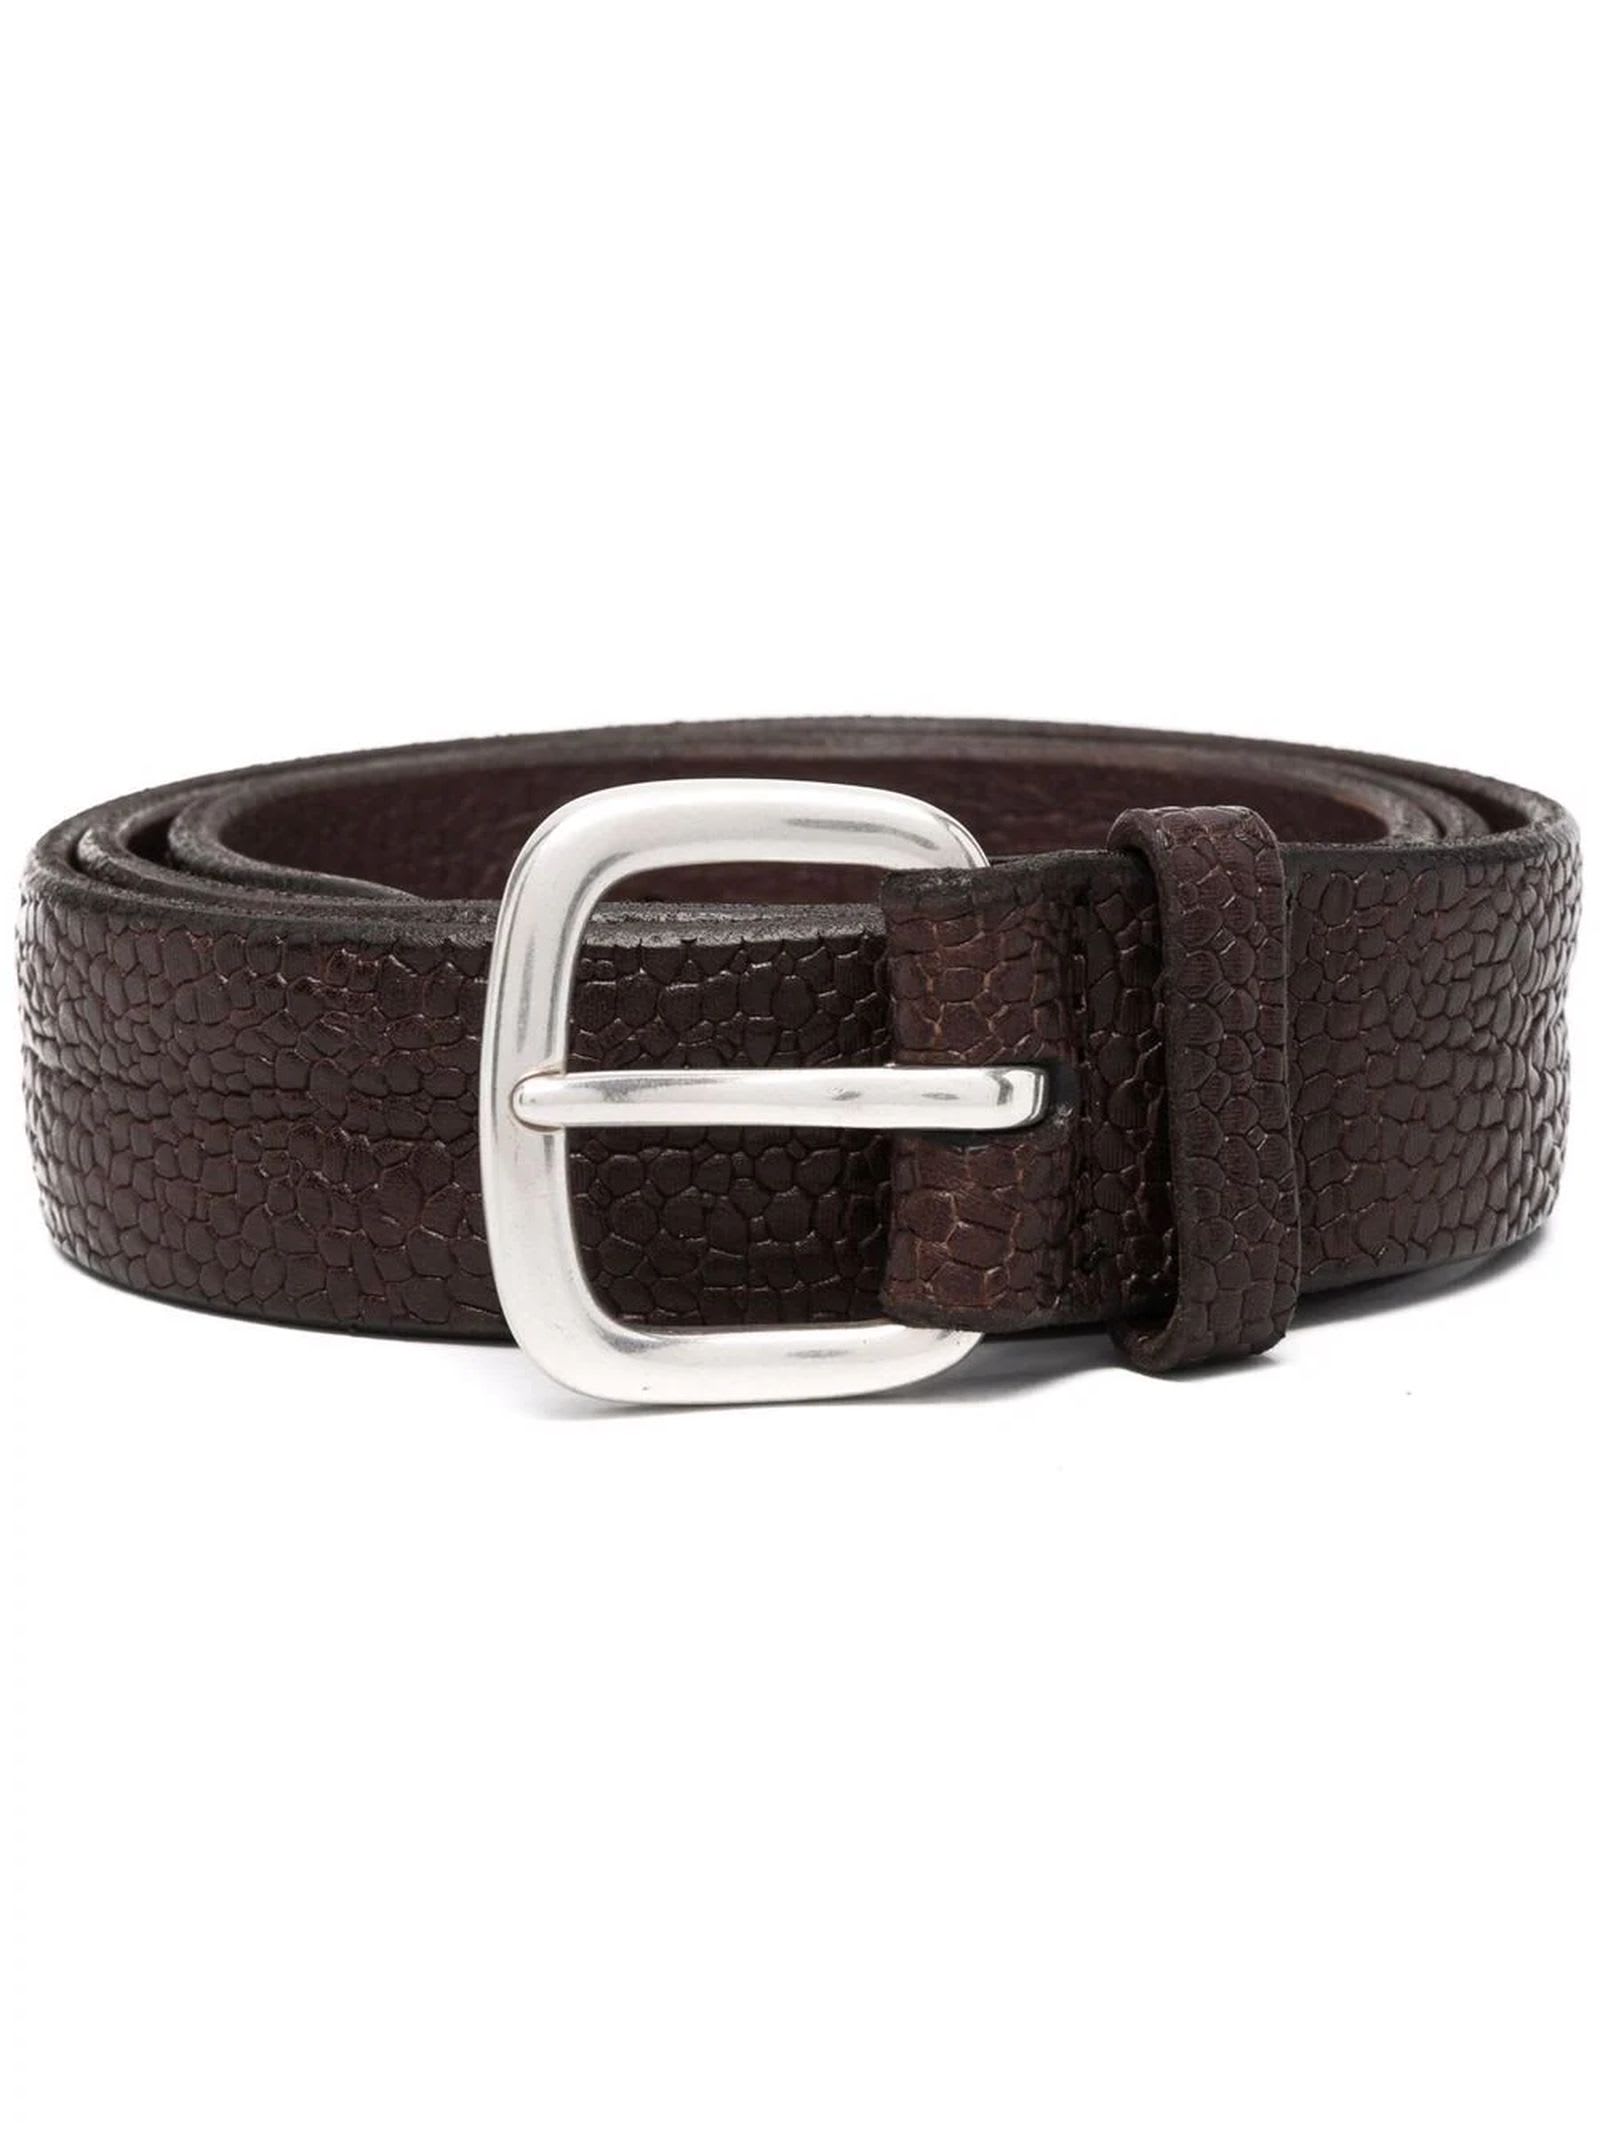 Orciani Grit Embossed Leather Belt